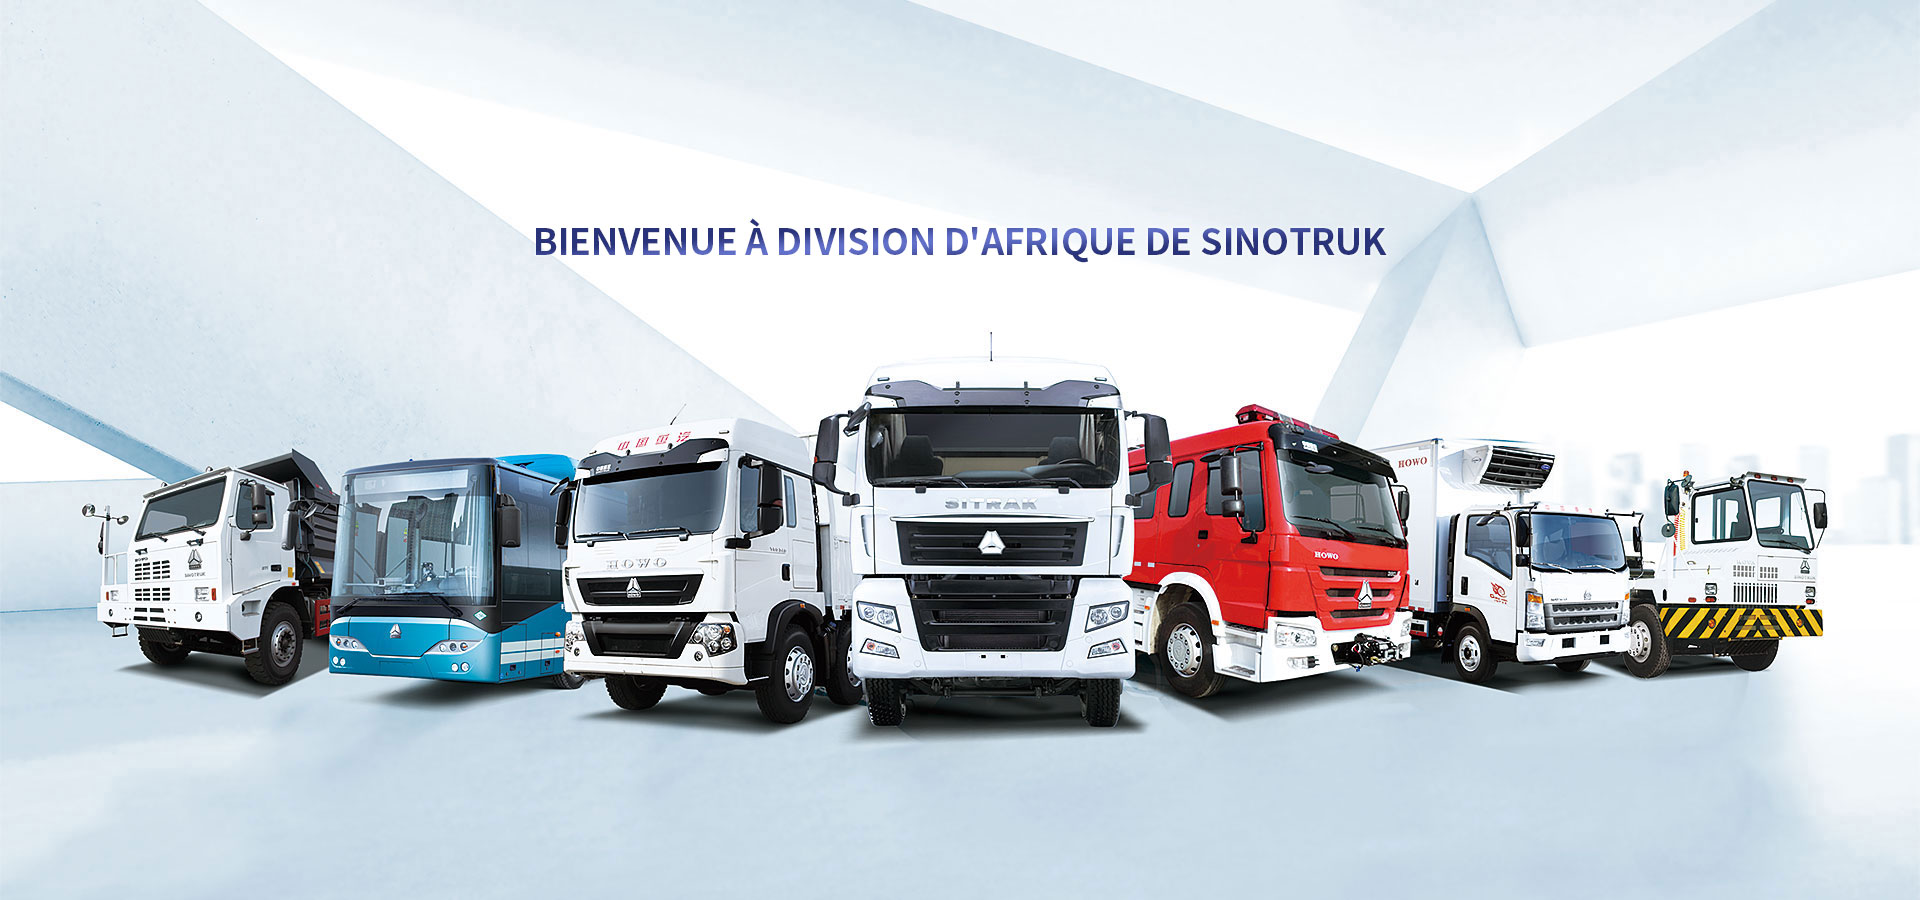 WELCOME TO THE SINOTRUK AFRICA